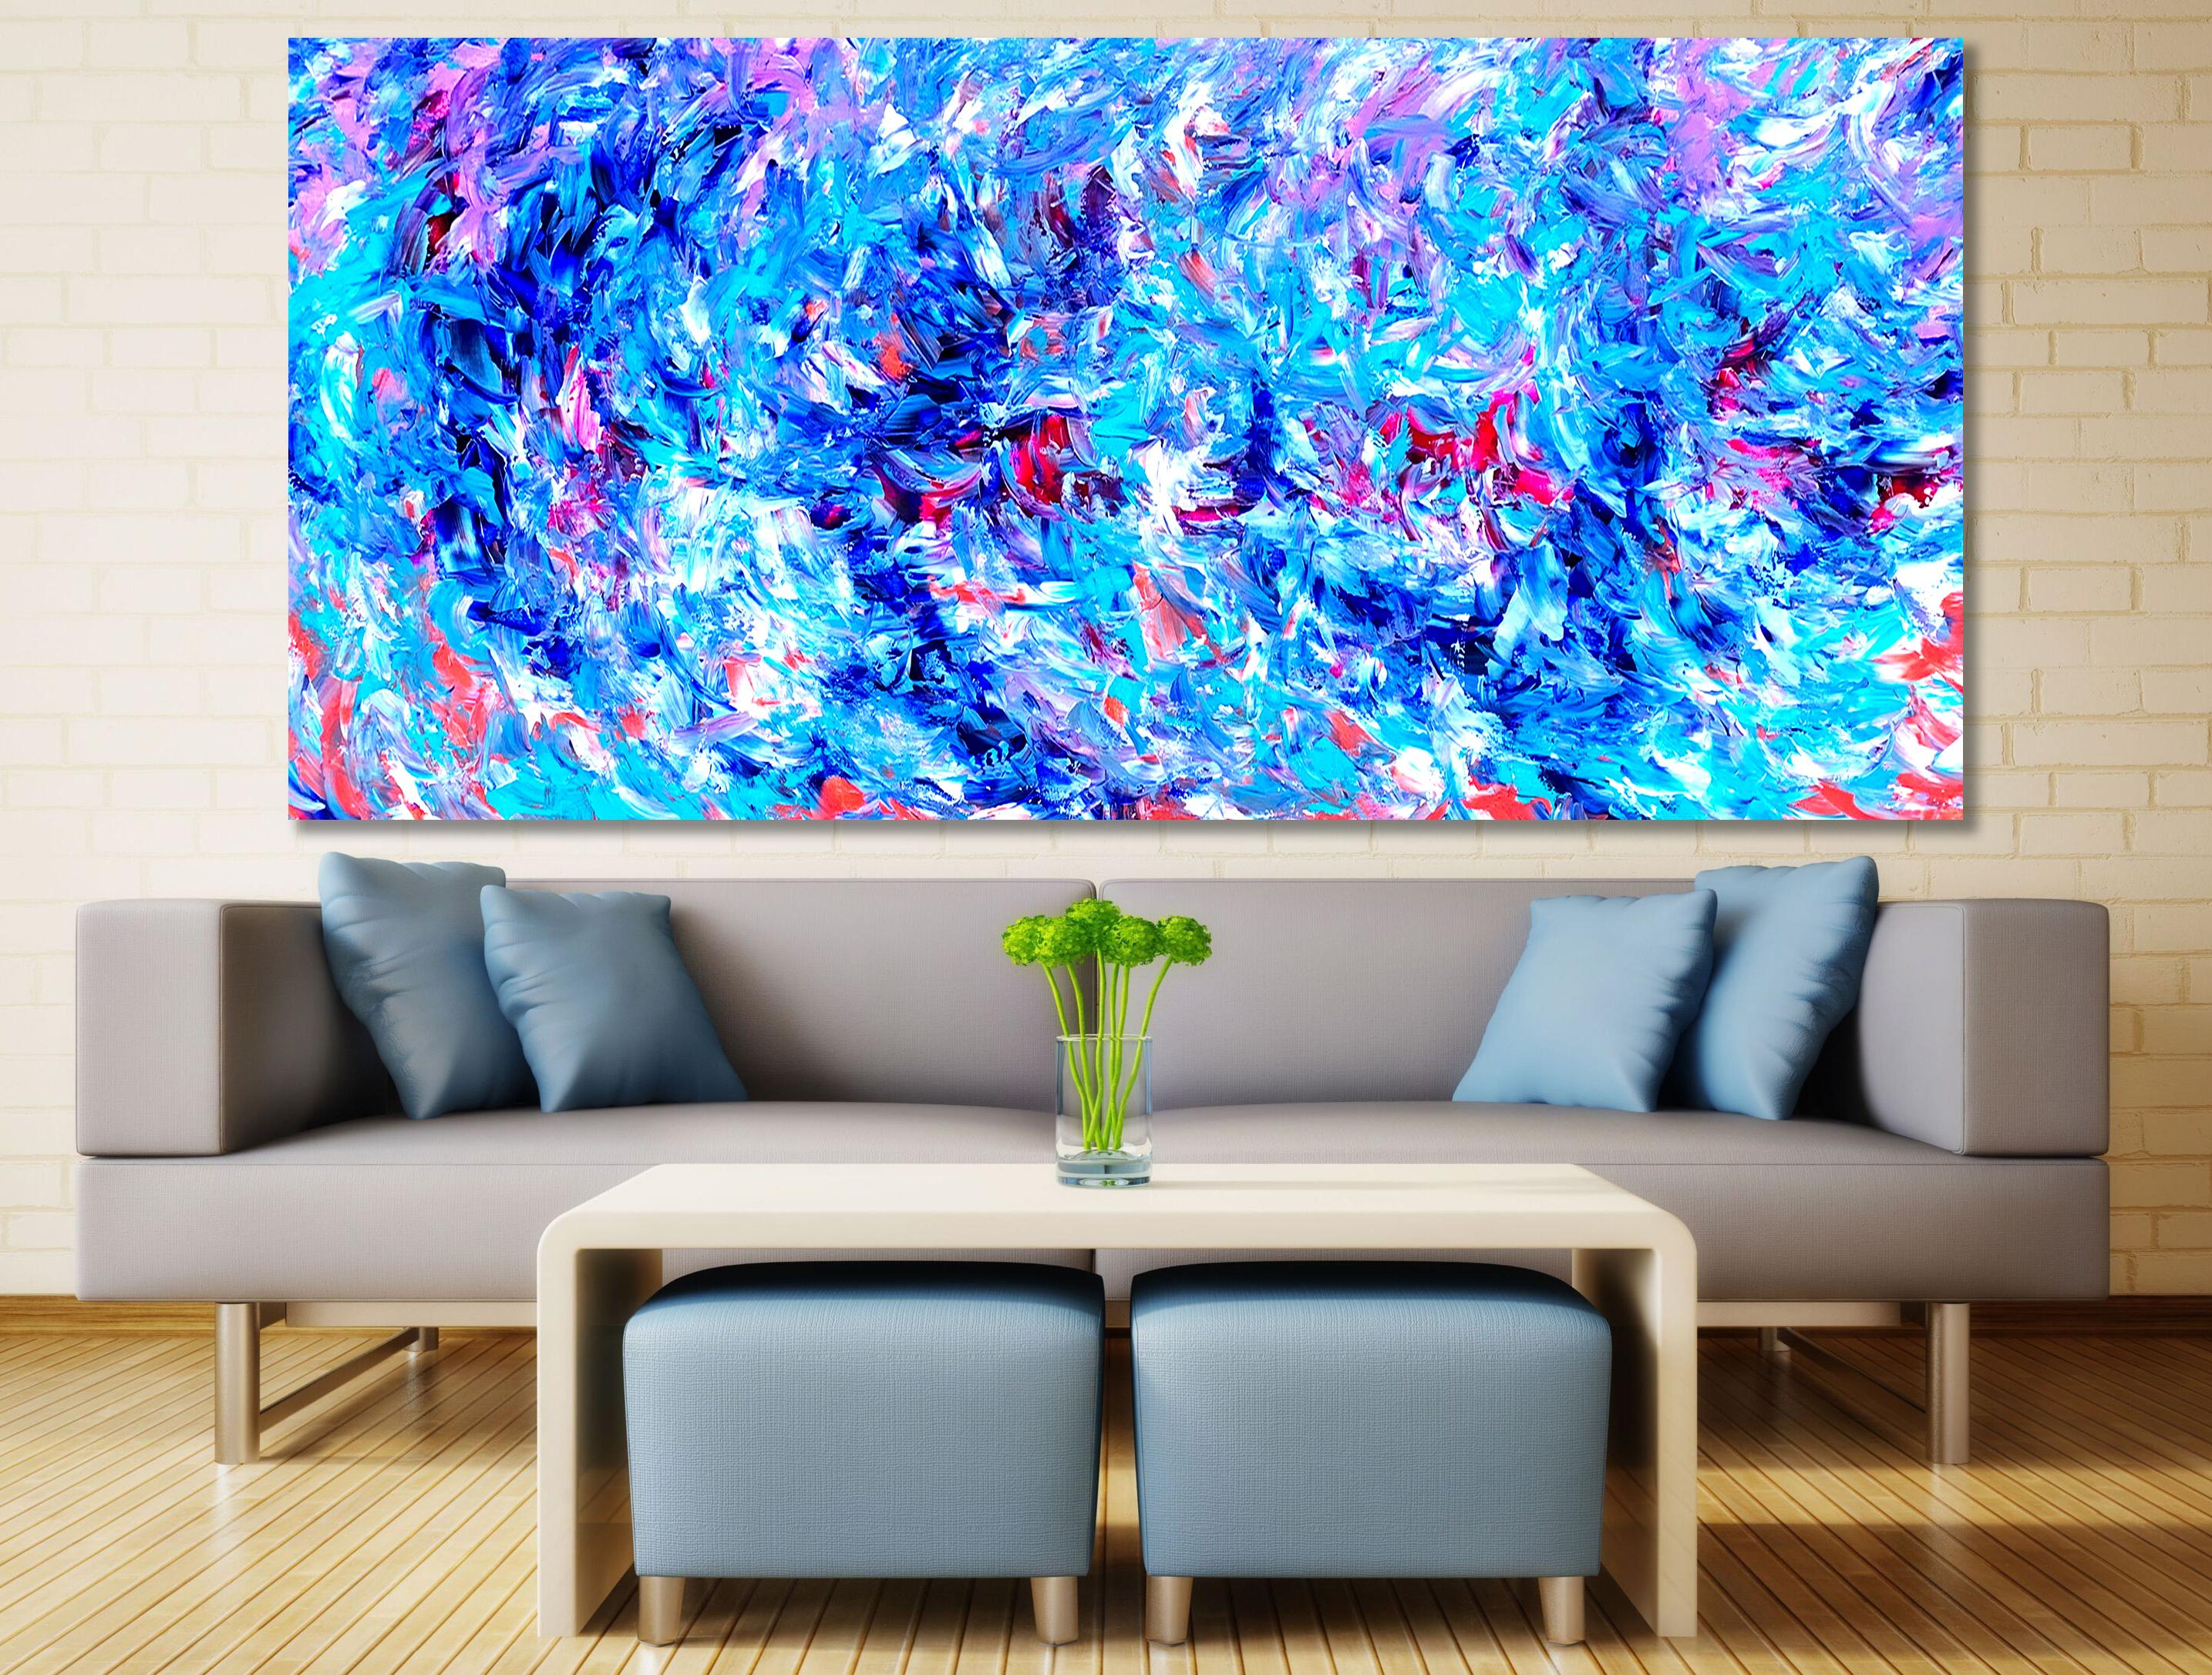 This artwork is an emotional exploration of the colour blue with a hint of magenta and a couple of other secondary colour. The way blue dominates and goes from light blue to navy also is contemplative and emotionally stated. The work is in the style